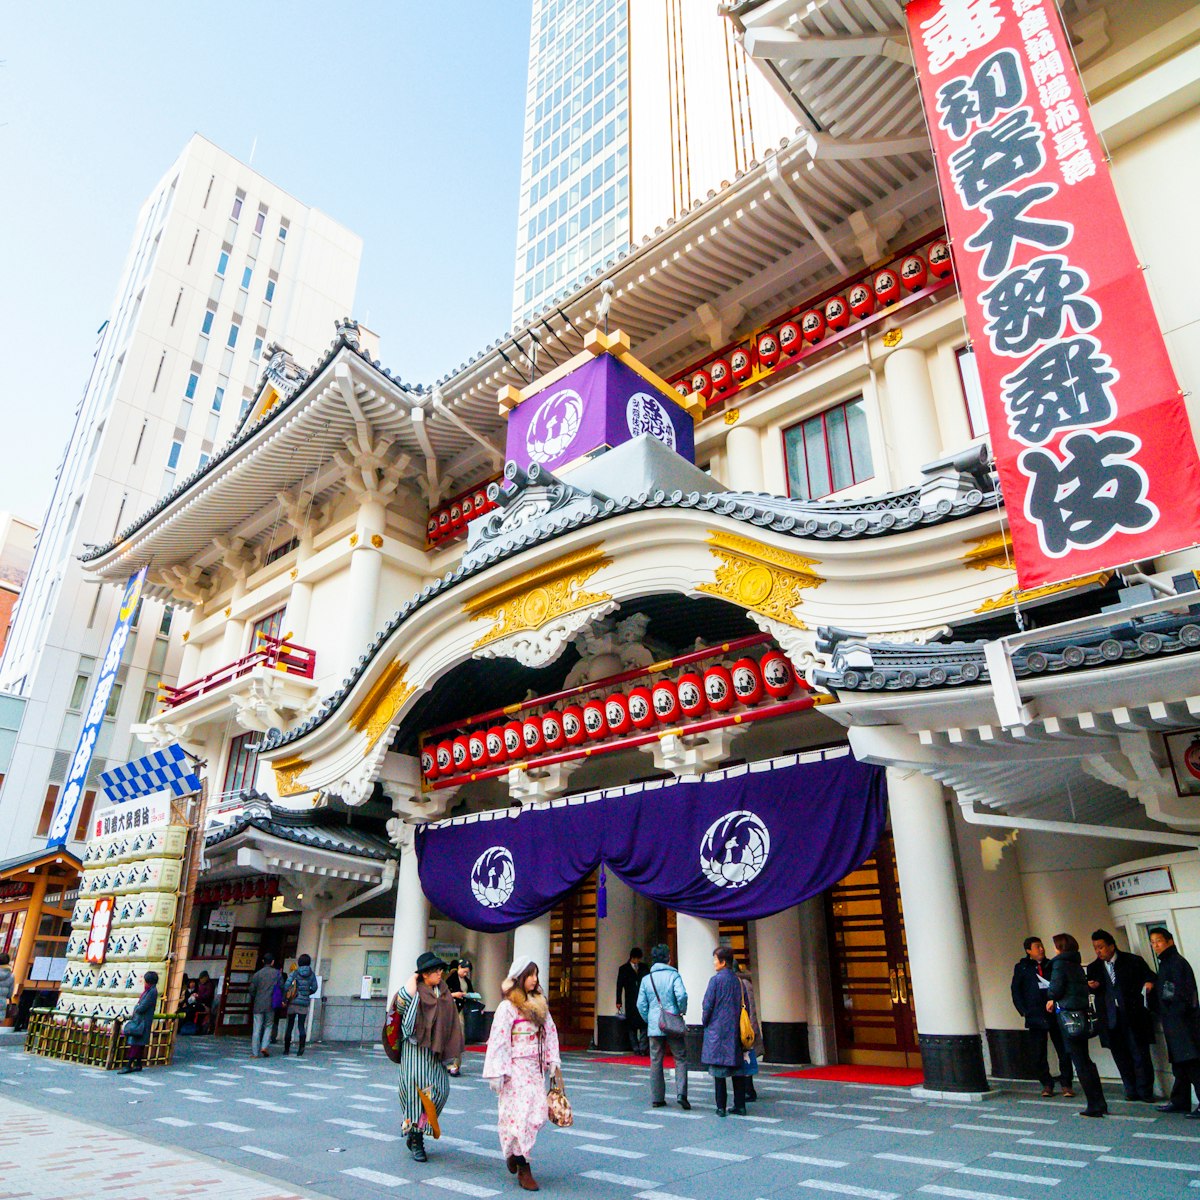 Tokyo, JAPAN - January 18, 2014: Kabuki-za (Kabukiza Theater) in Ginza is the principal theater in Tokyo for the traditional kabuki drama form. ; Shutterstock ID 1441778489; full: 65050; gl: Online Editorial; netsuite: Best things to do in Tokyo; your: Bailey Freeman
1441778489